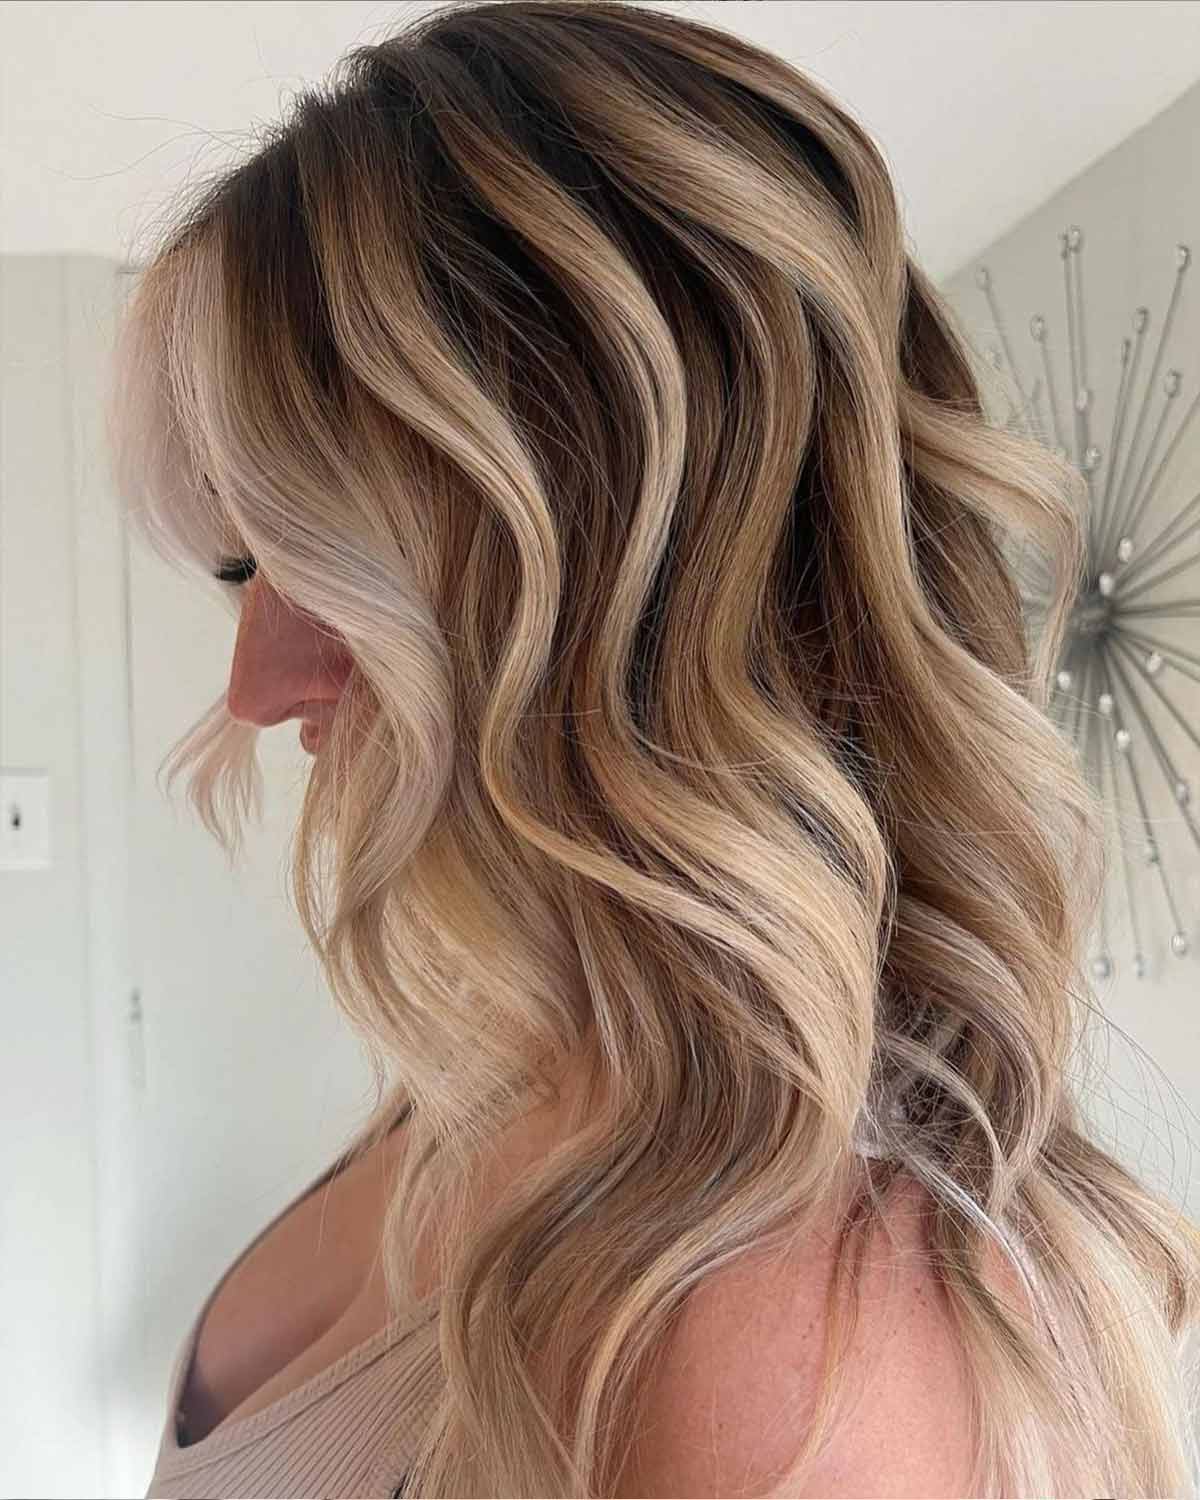 10 Blonde Hair Colors With Highlights That Look Stunning